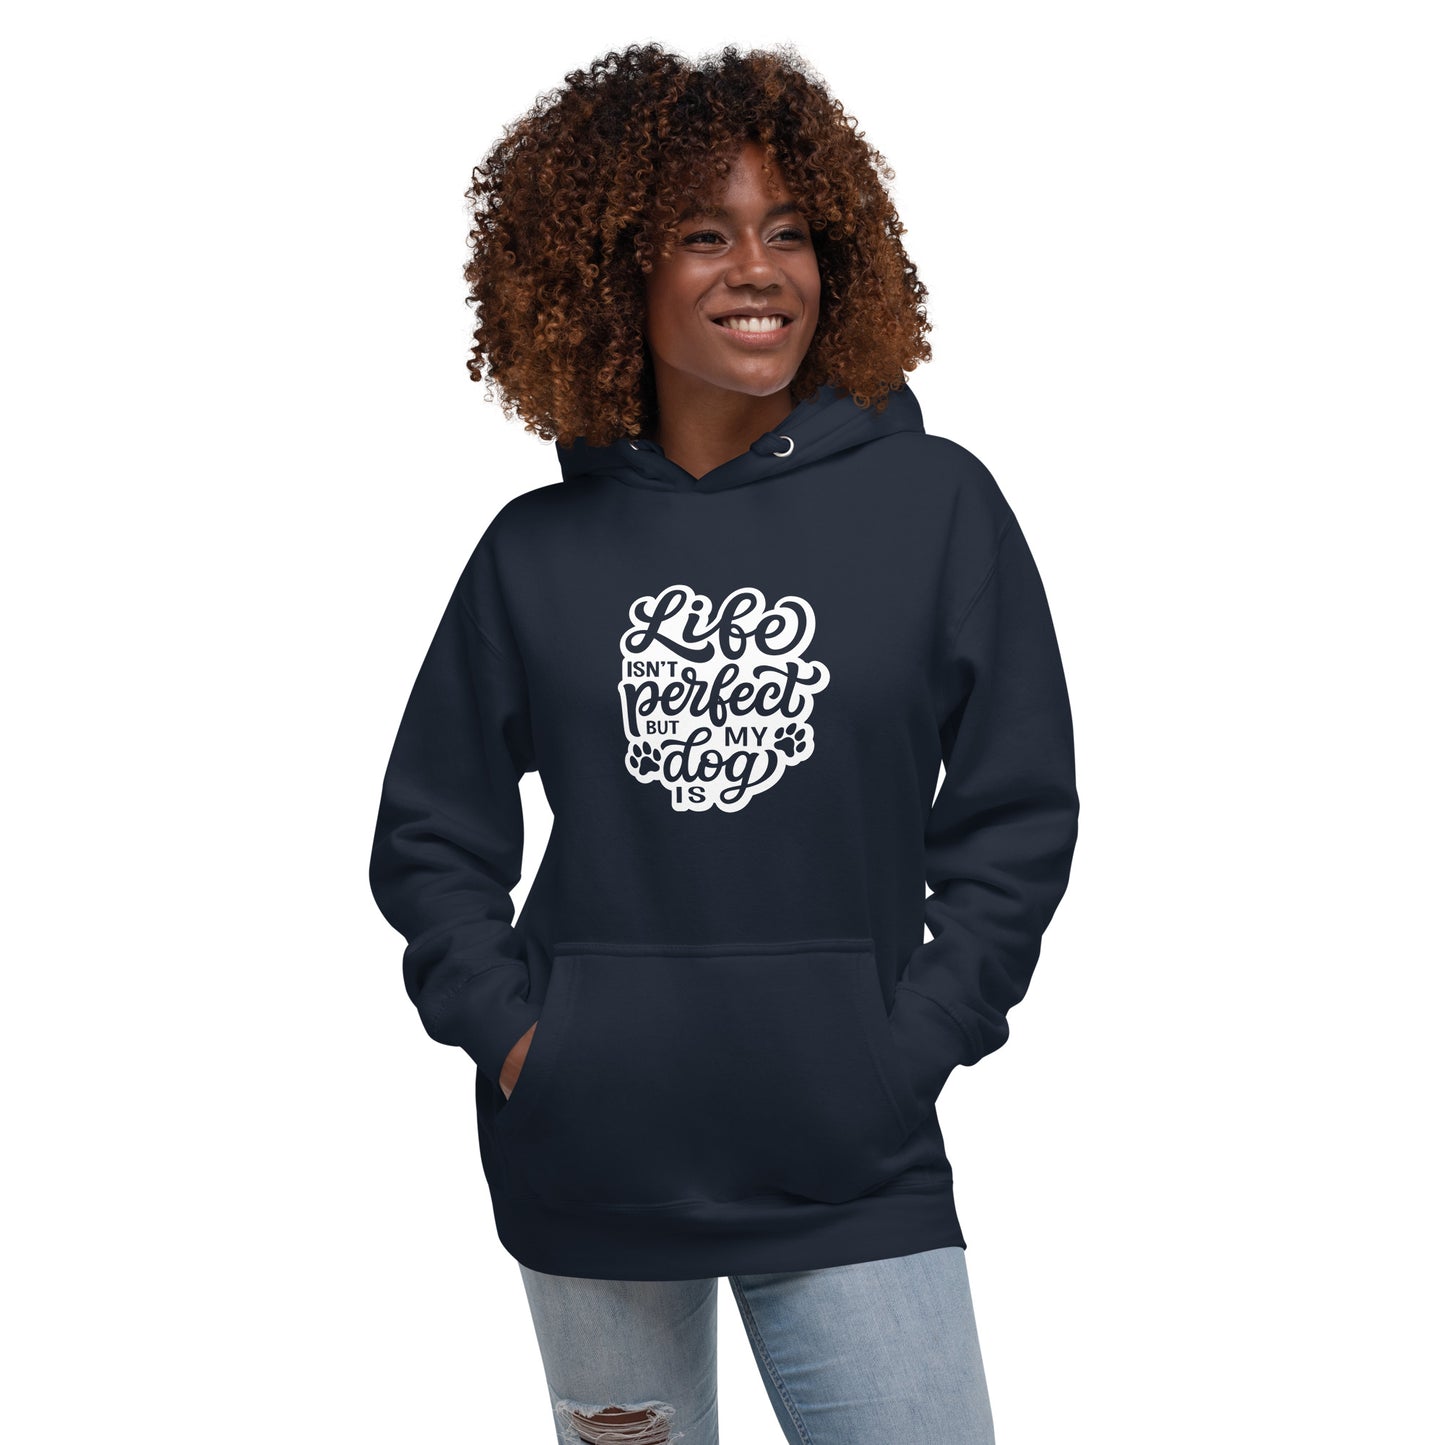 MY DOG IS PERFECT...Unisex Hoodie